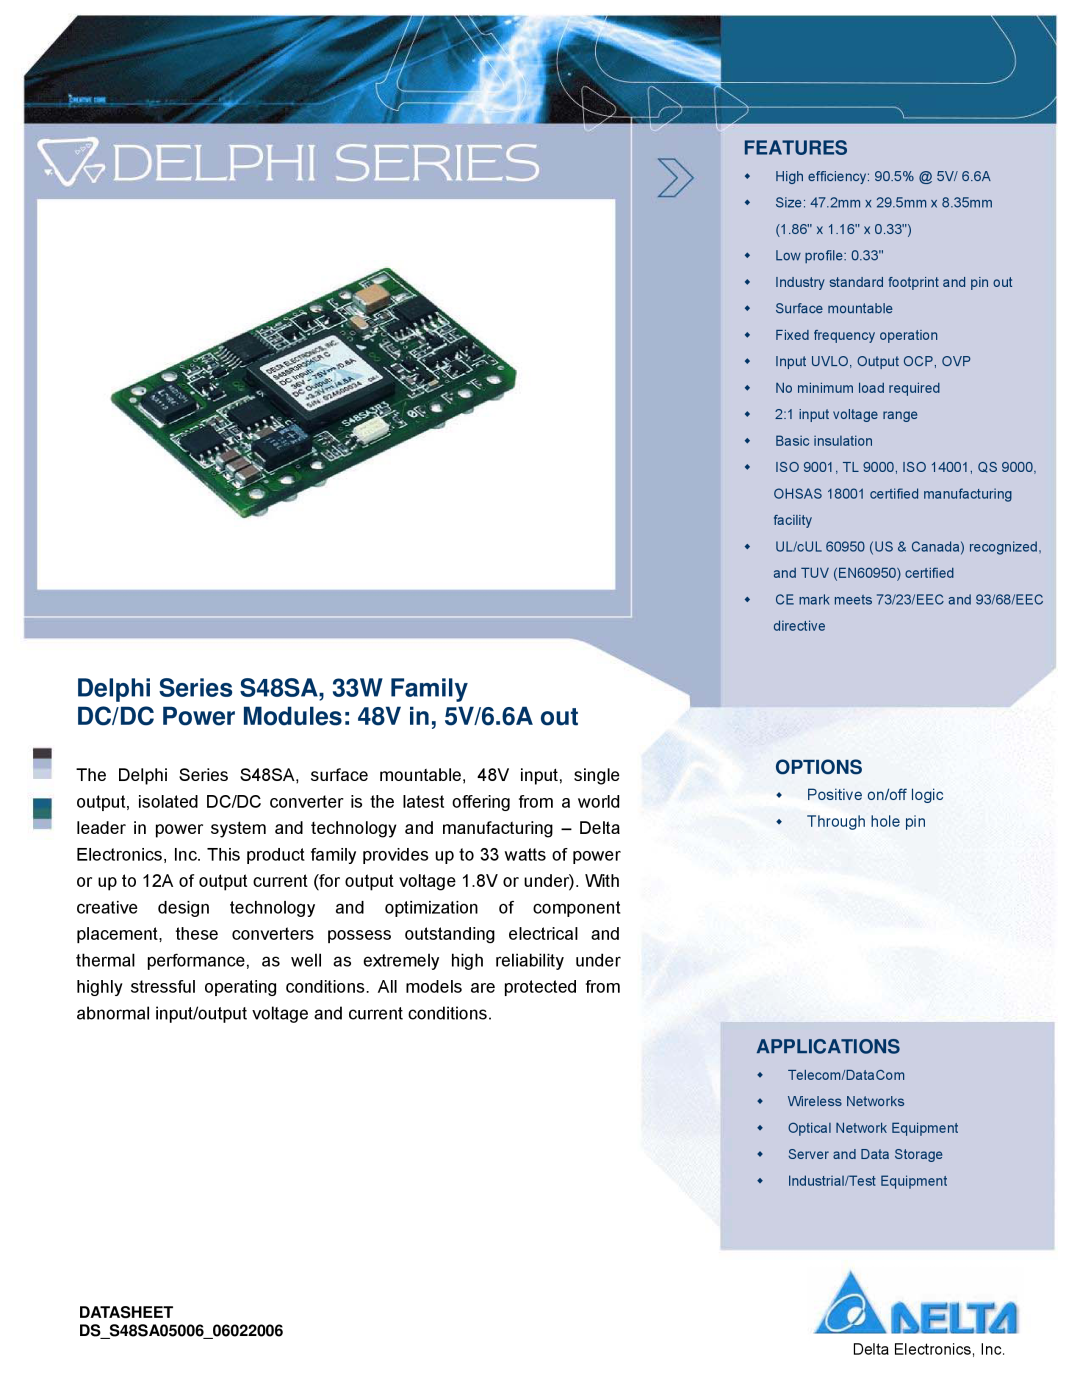 Delta Electronics manual Delphi Series S48SA, 33W Family, DC/DC Power Modules 48V in, 5V/6.6A out, Features, Options 